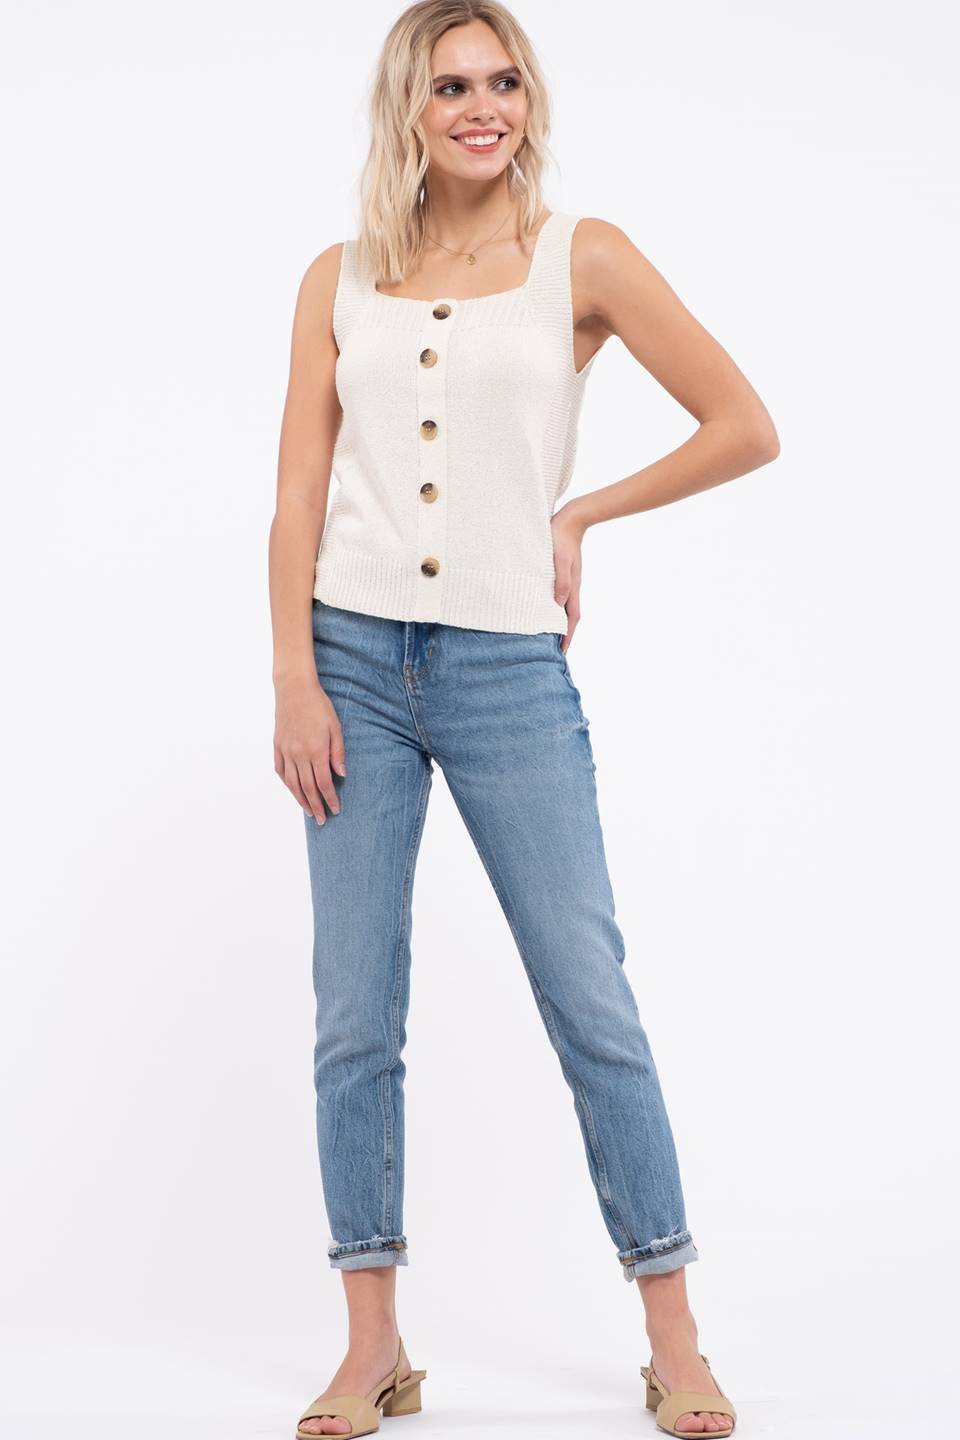 Square Neck Knit Top with Button Detail